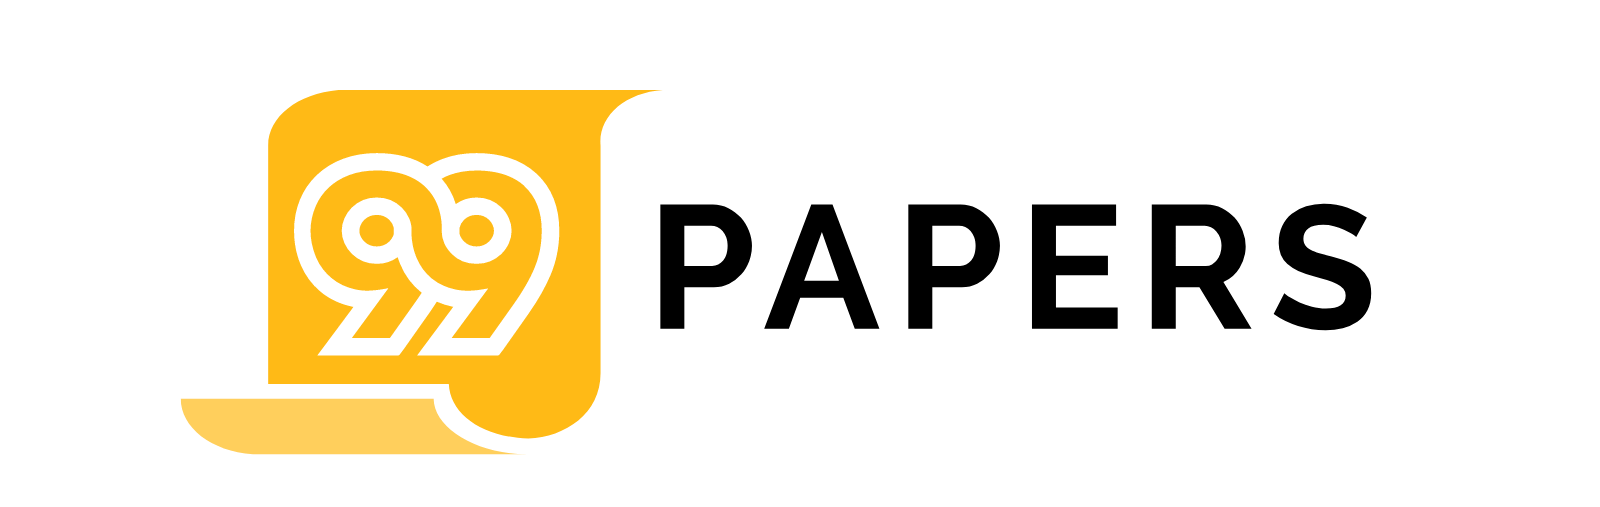 99papers logo